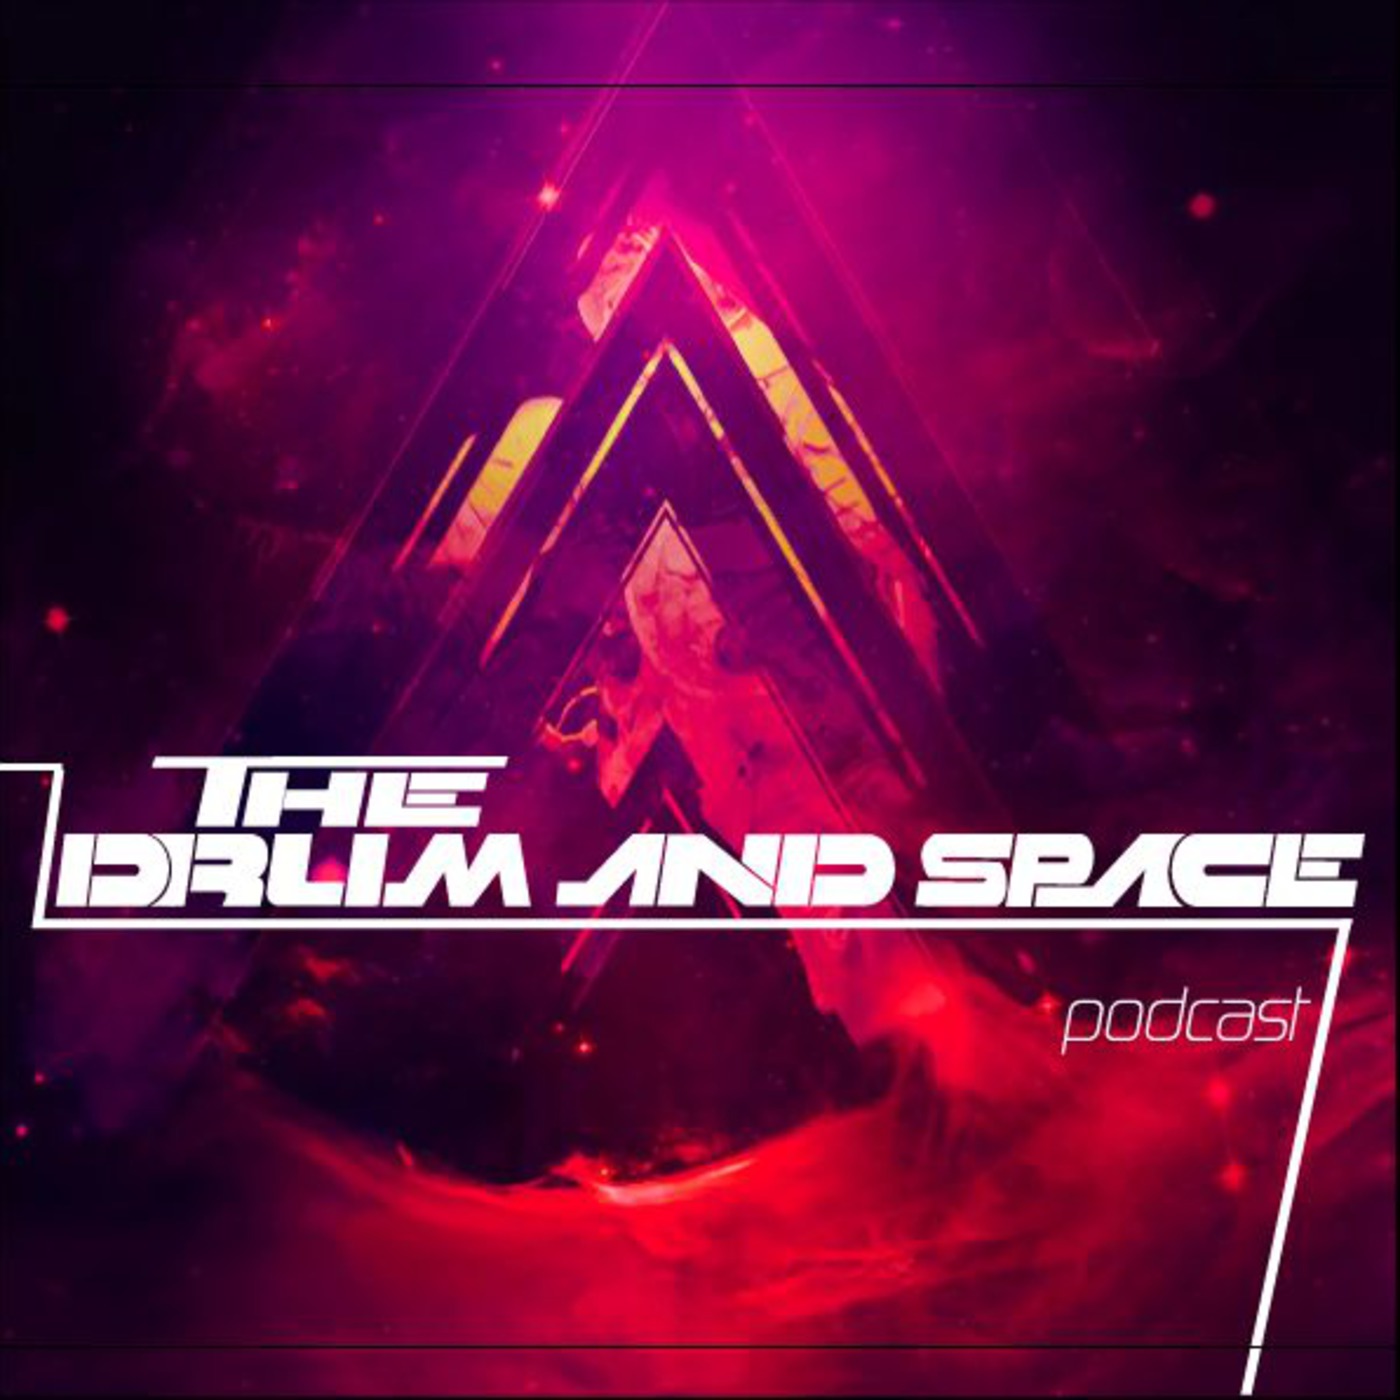 Drum and Space Podcast